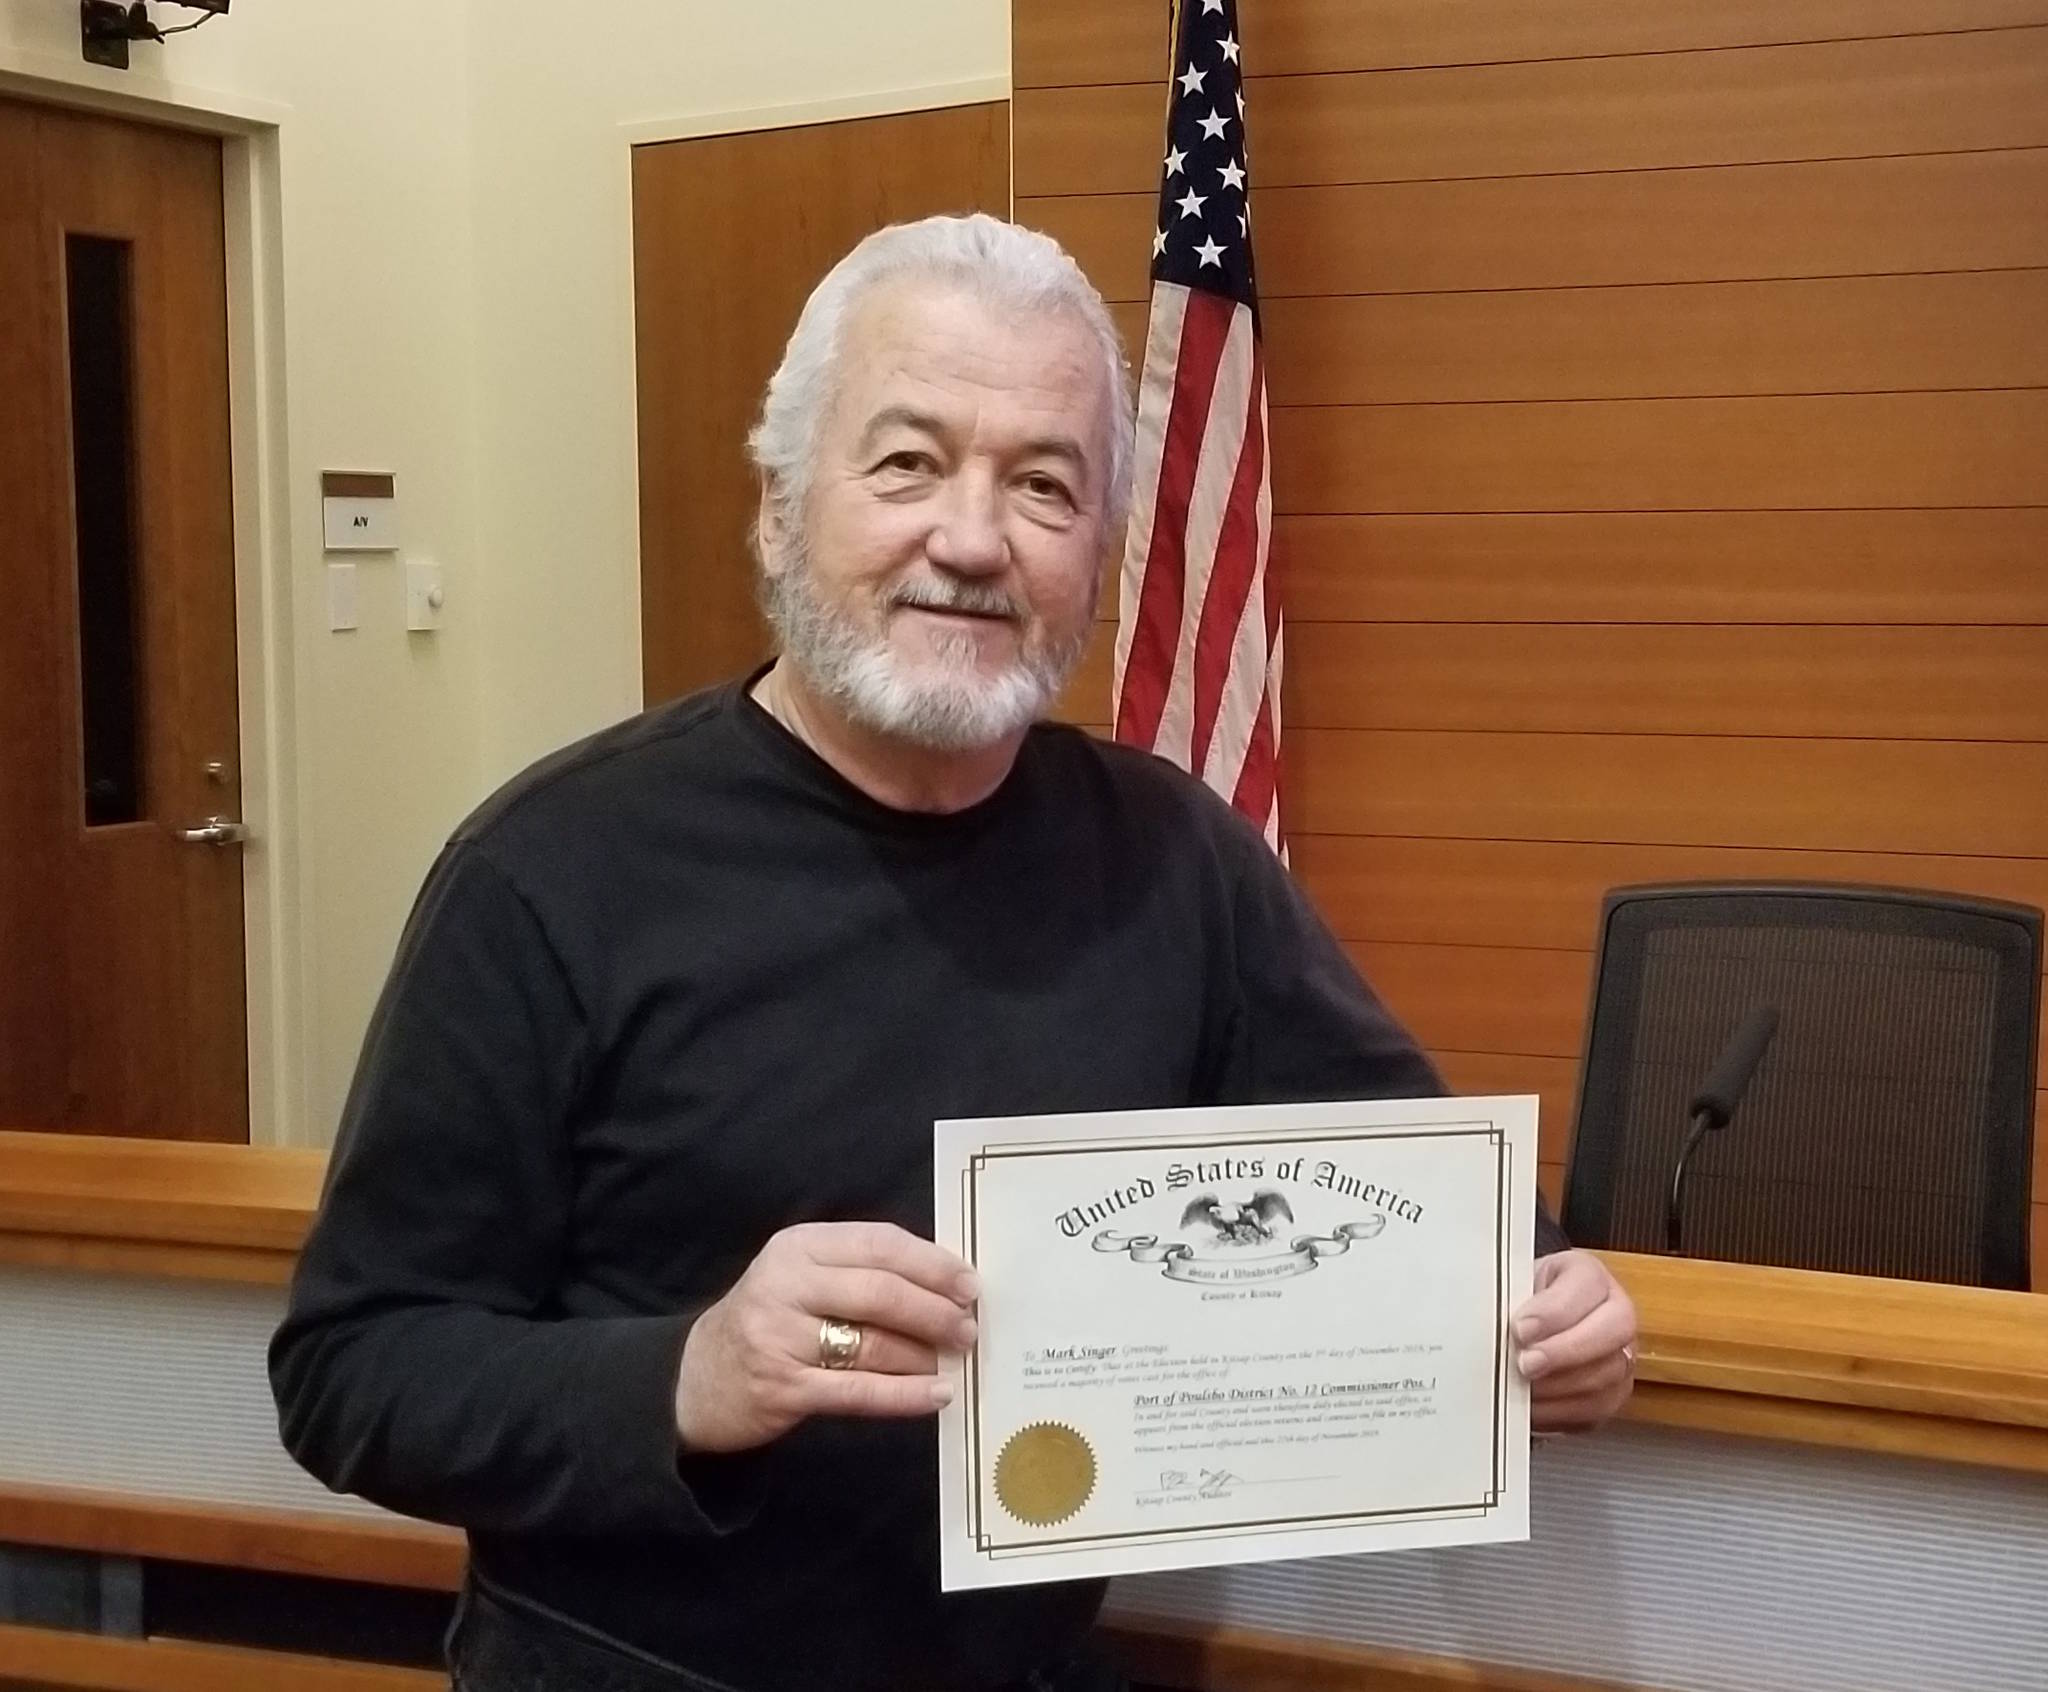 One out, one in: Poulsbo port commissioner steps down moments after new commissioner sworn in